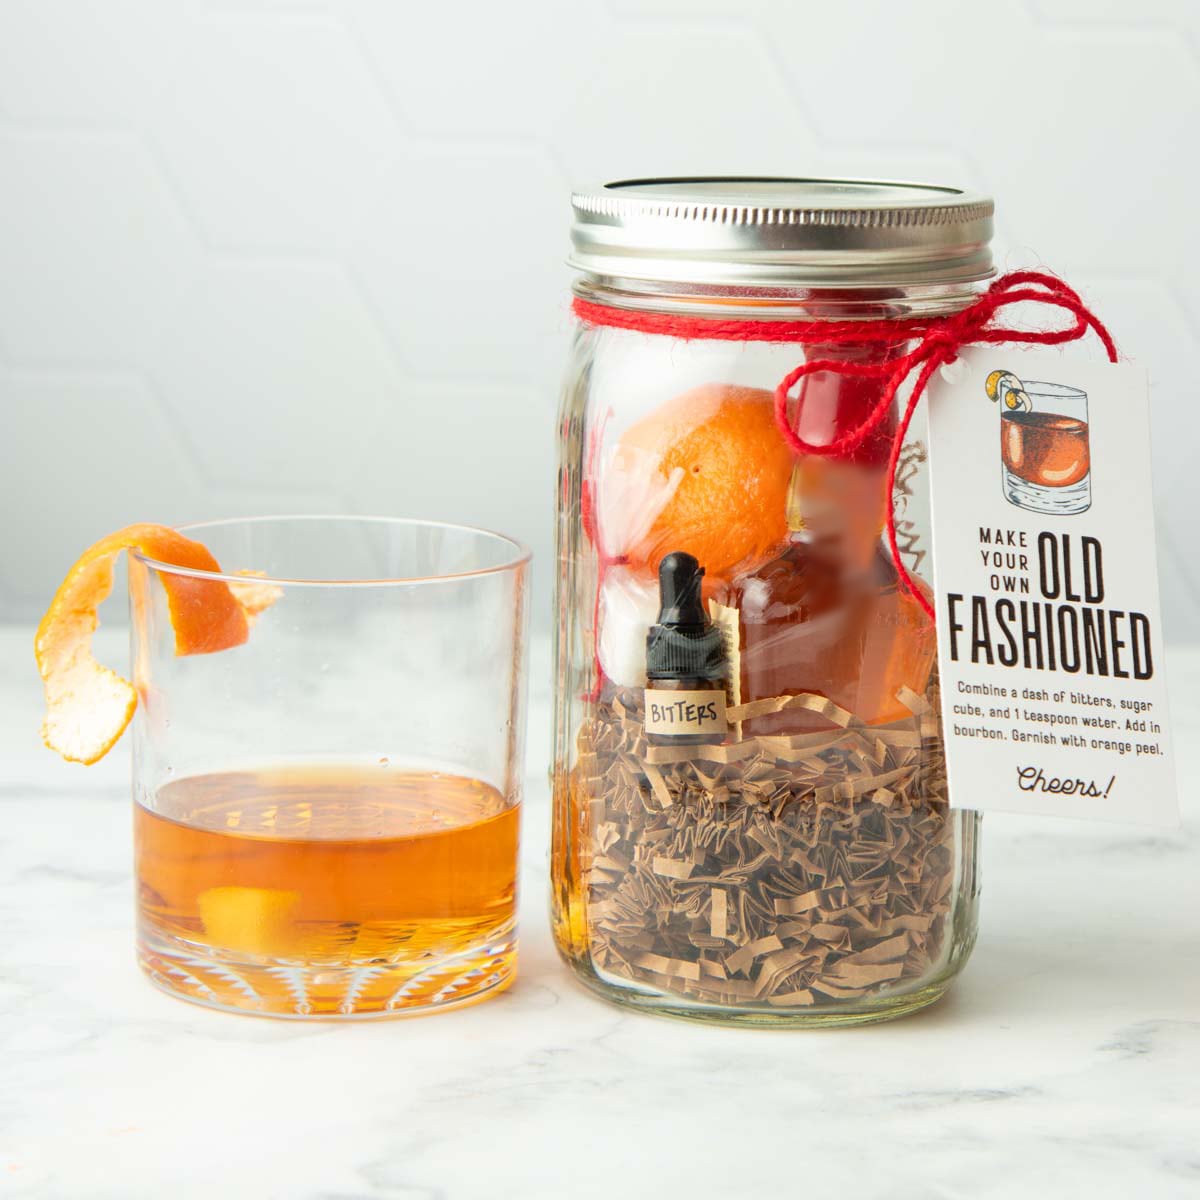 An old fashioned sits next to a make your own old fashioned cocktail kit packaged for gifting.